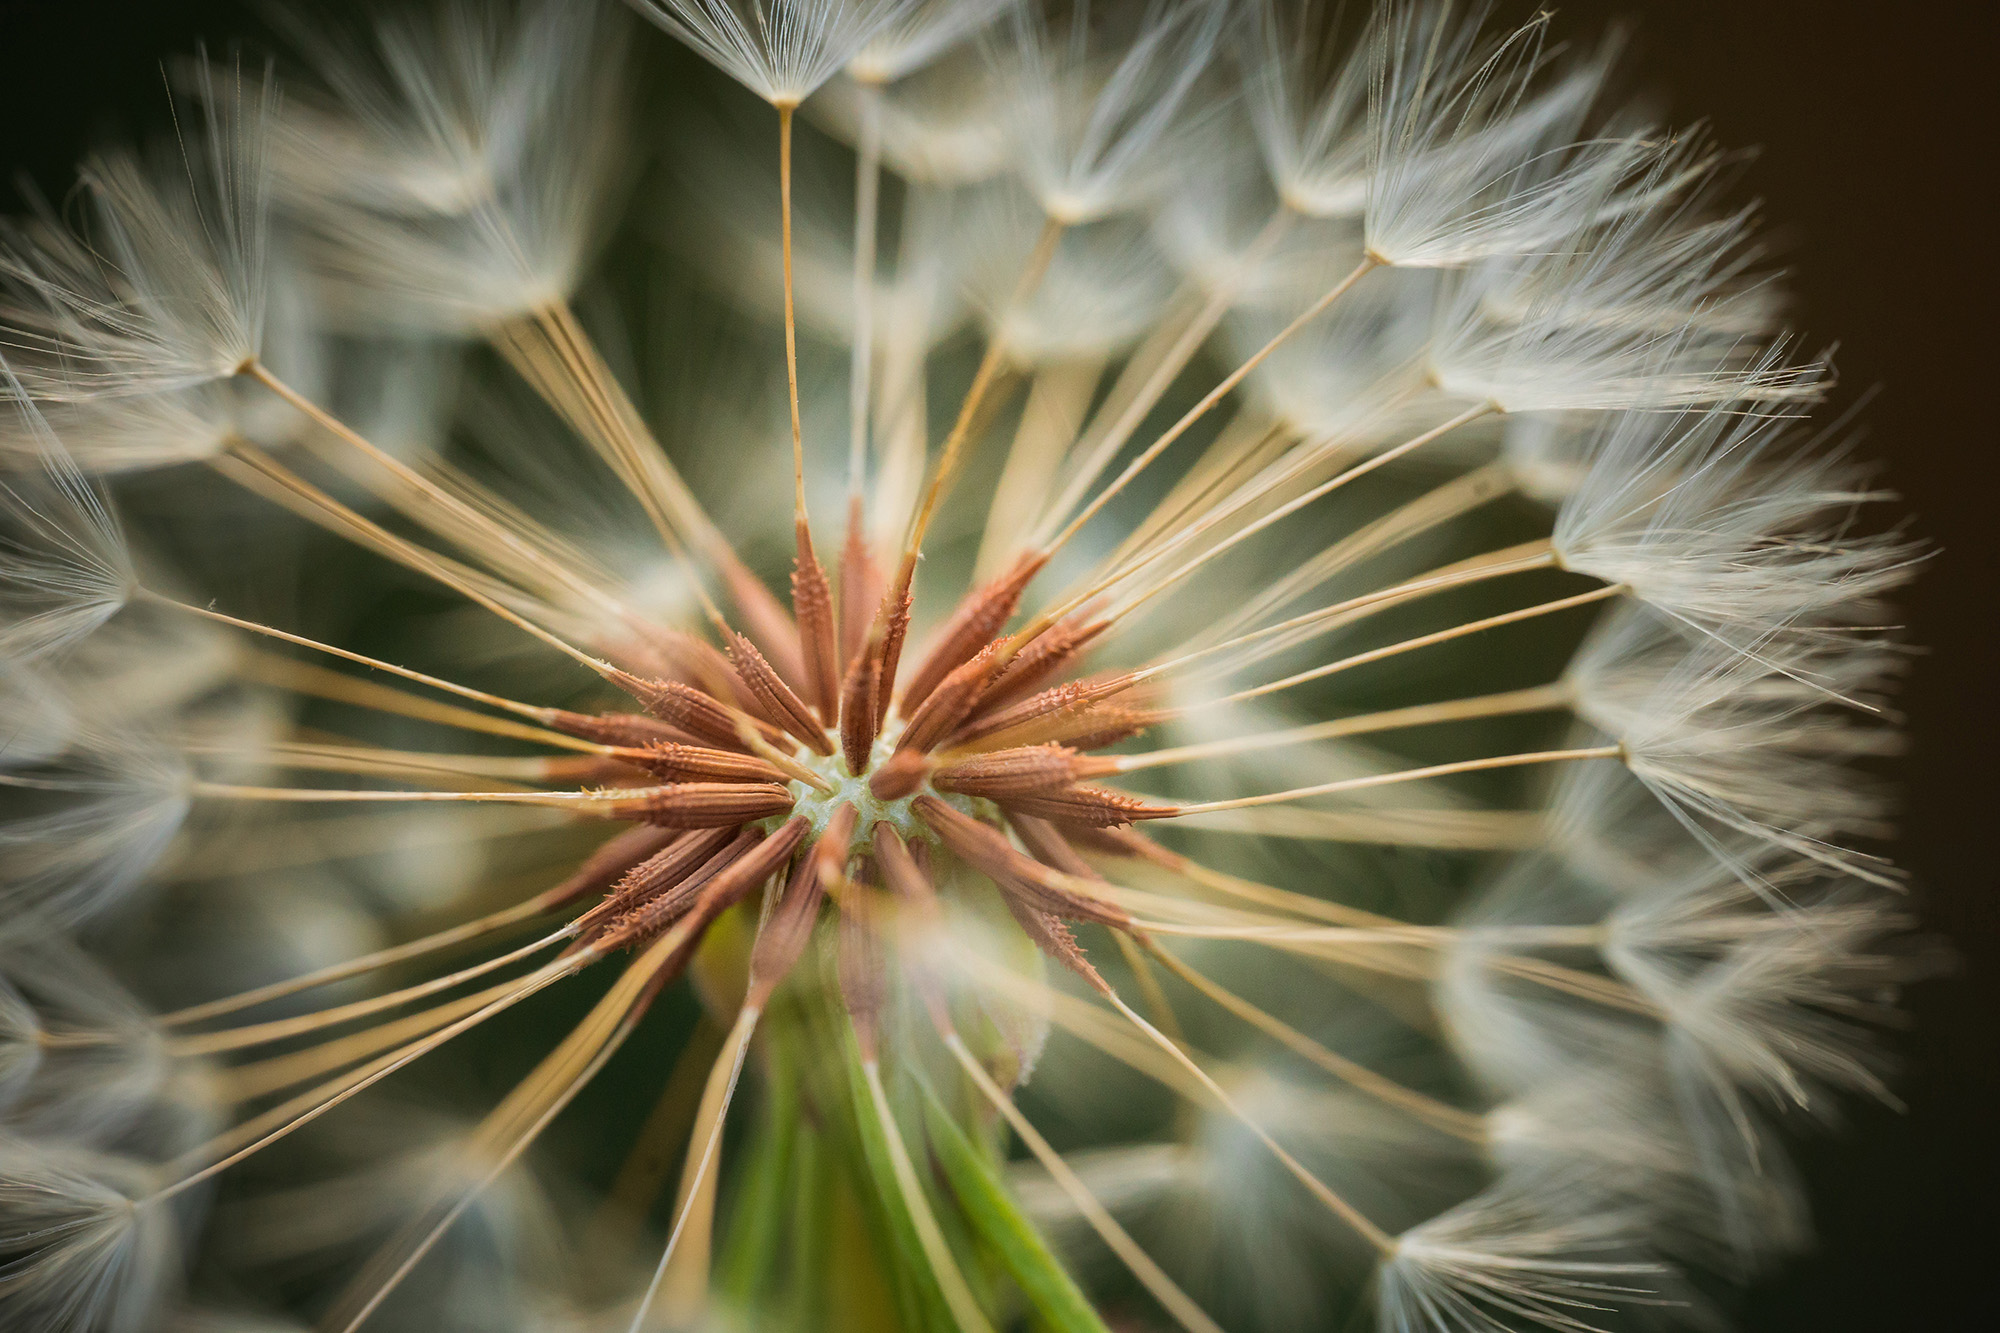 A Day the Farm with the SIGMA 105mm F2.8 DG DN Macro Art | SIGMA Blog